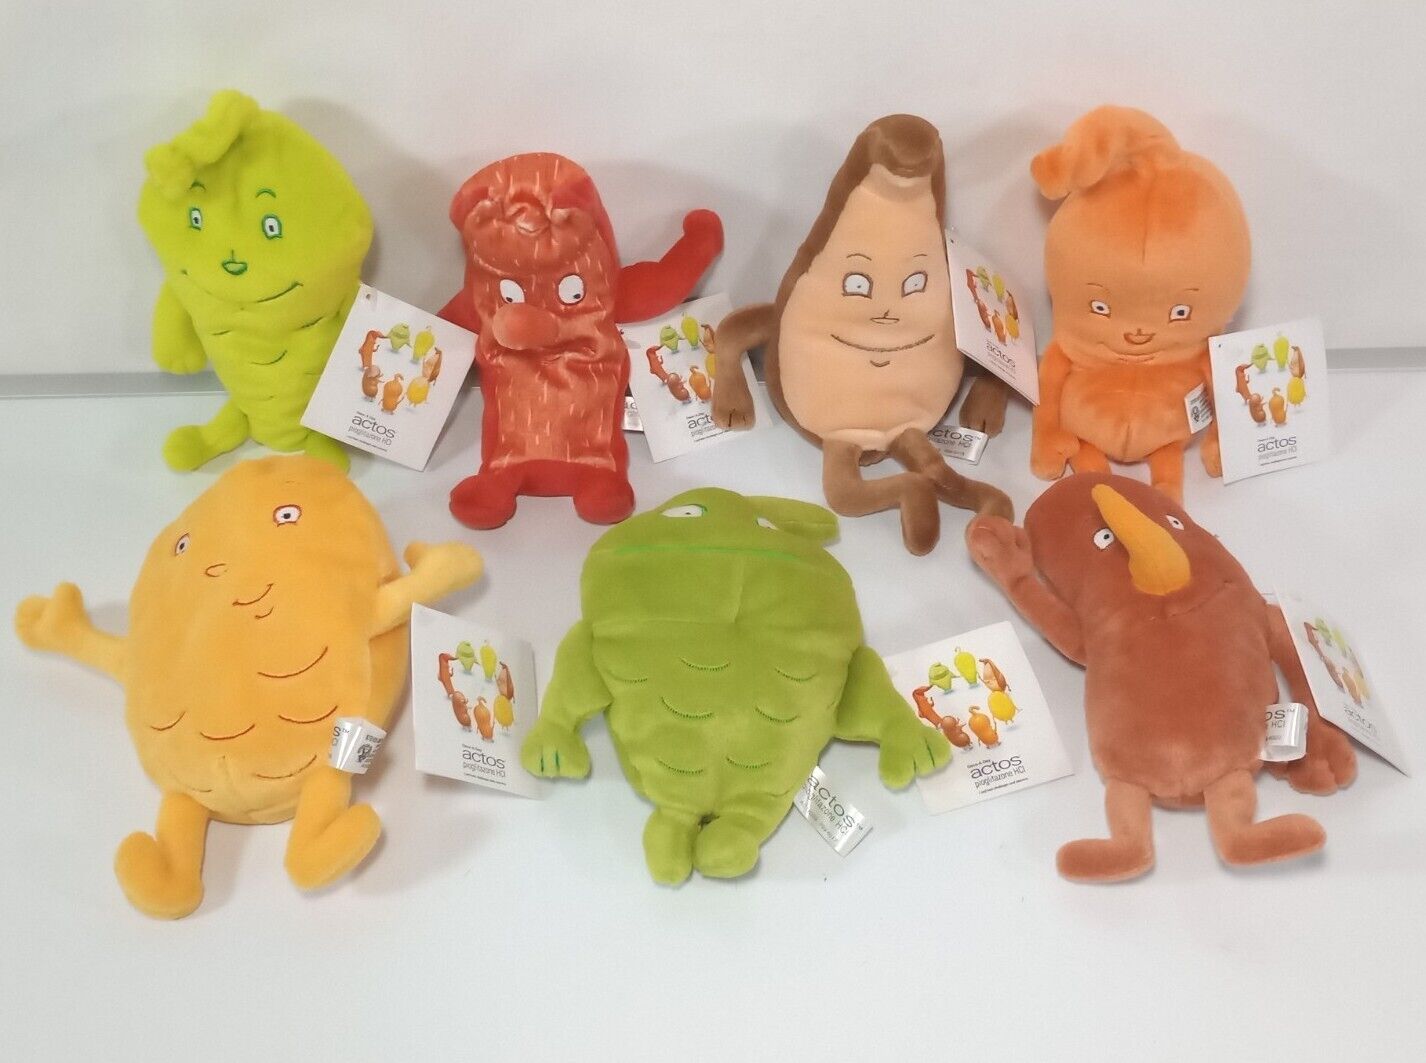 ACTOS Plush Stuffed Organs - Drug Rep Toy Lot of 7 Complete Set - NEW with Tags